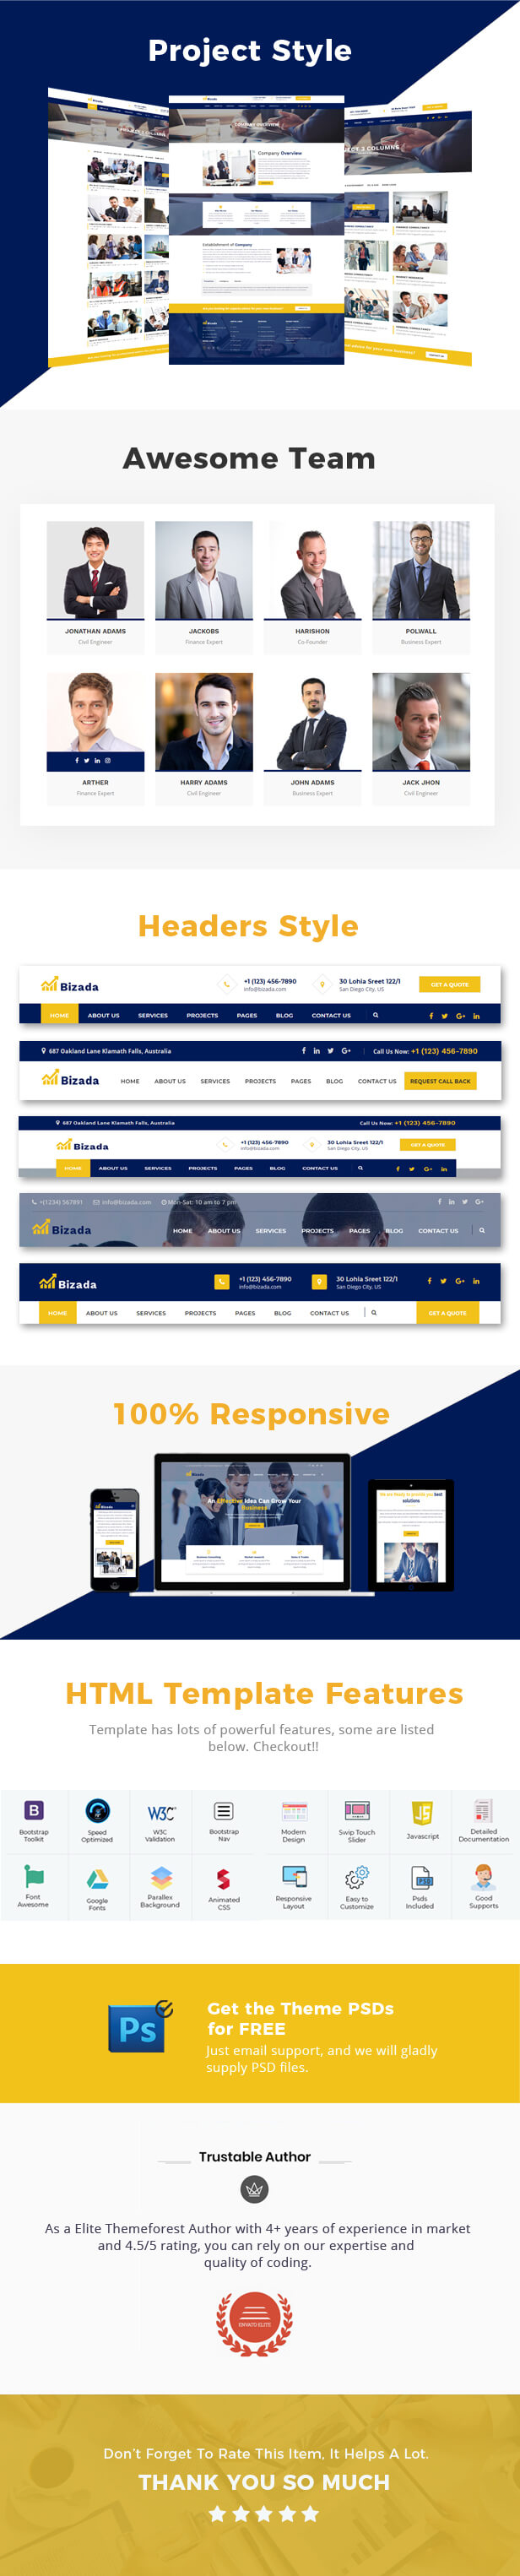 Bizada – Business Consulting HTML Template - 2